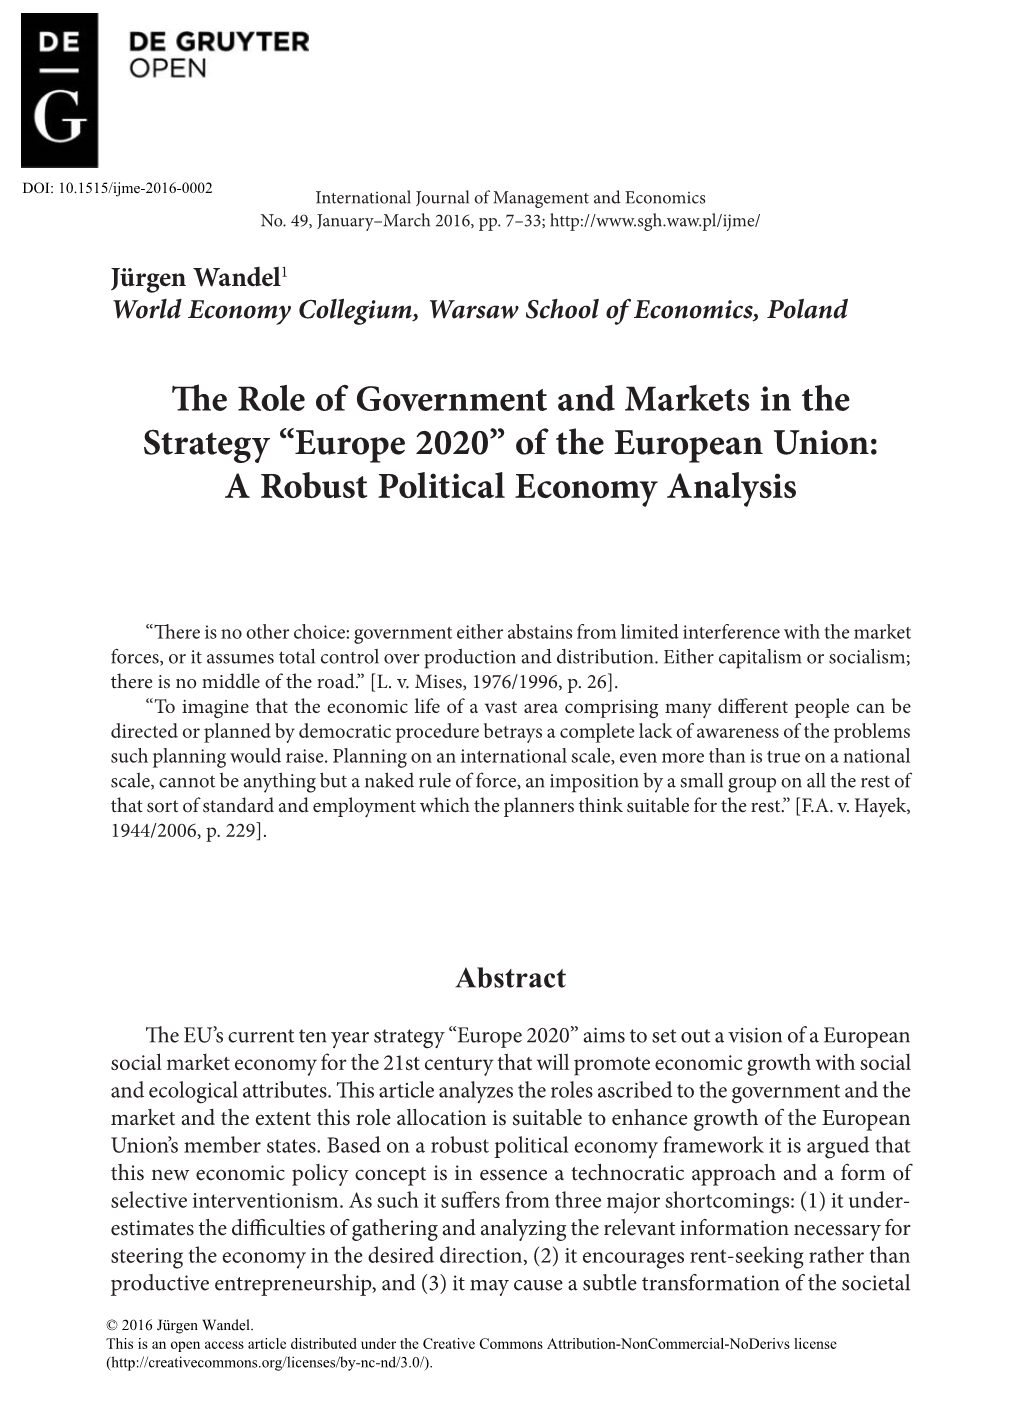 The Role of Government and Markets in the Strategy “Europe 2020” of the European Union: a Robust Political Economy Analysis